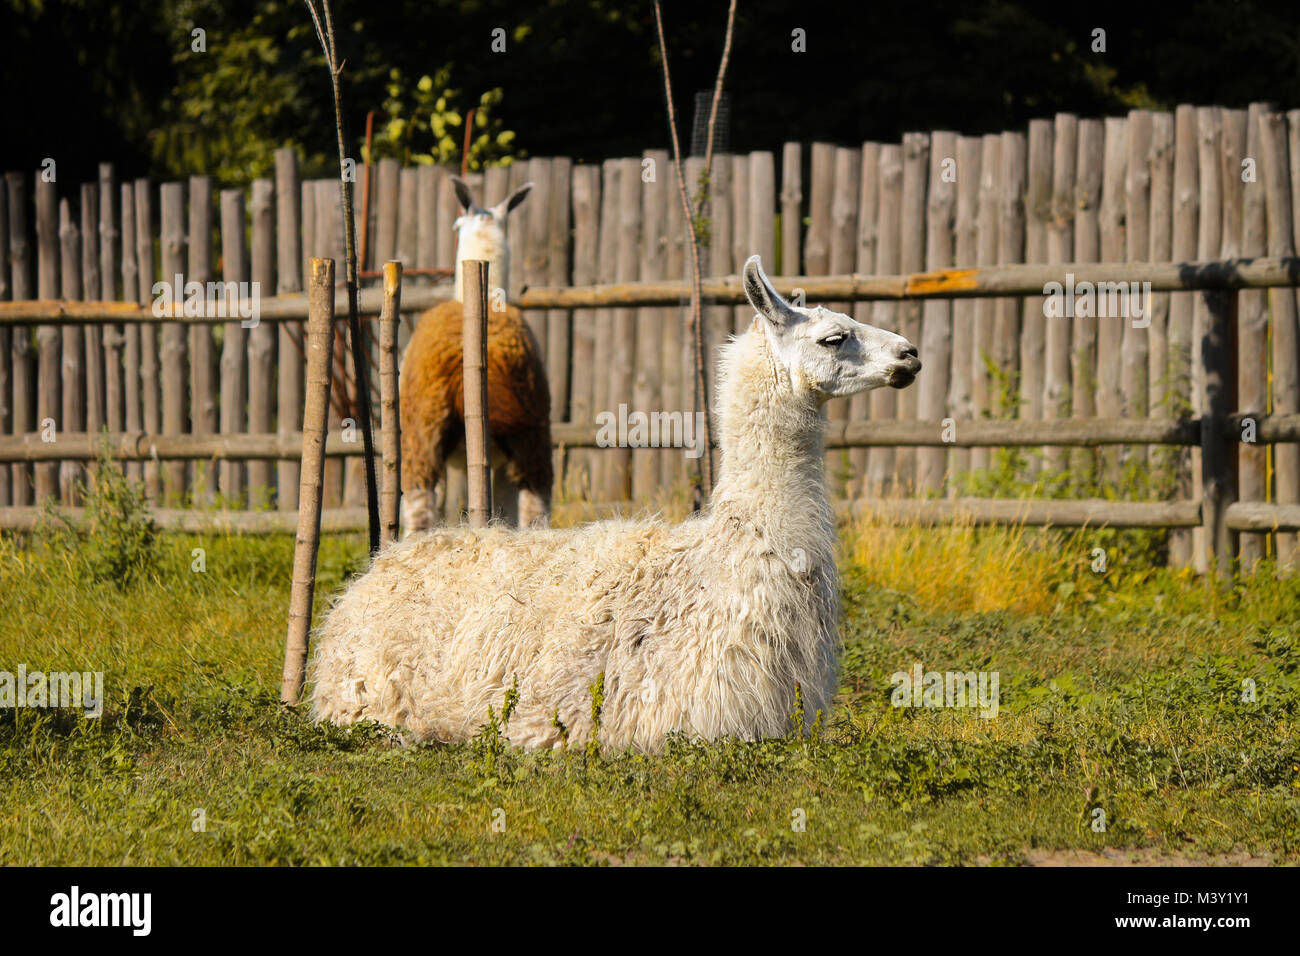 Lama rests at the Zoo,, wild animal Stock Photo